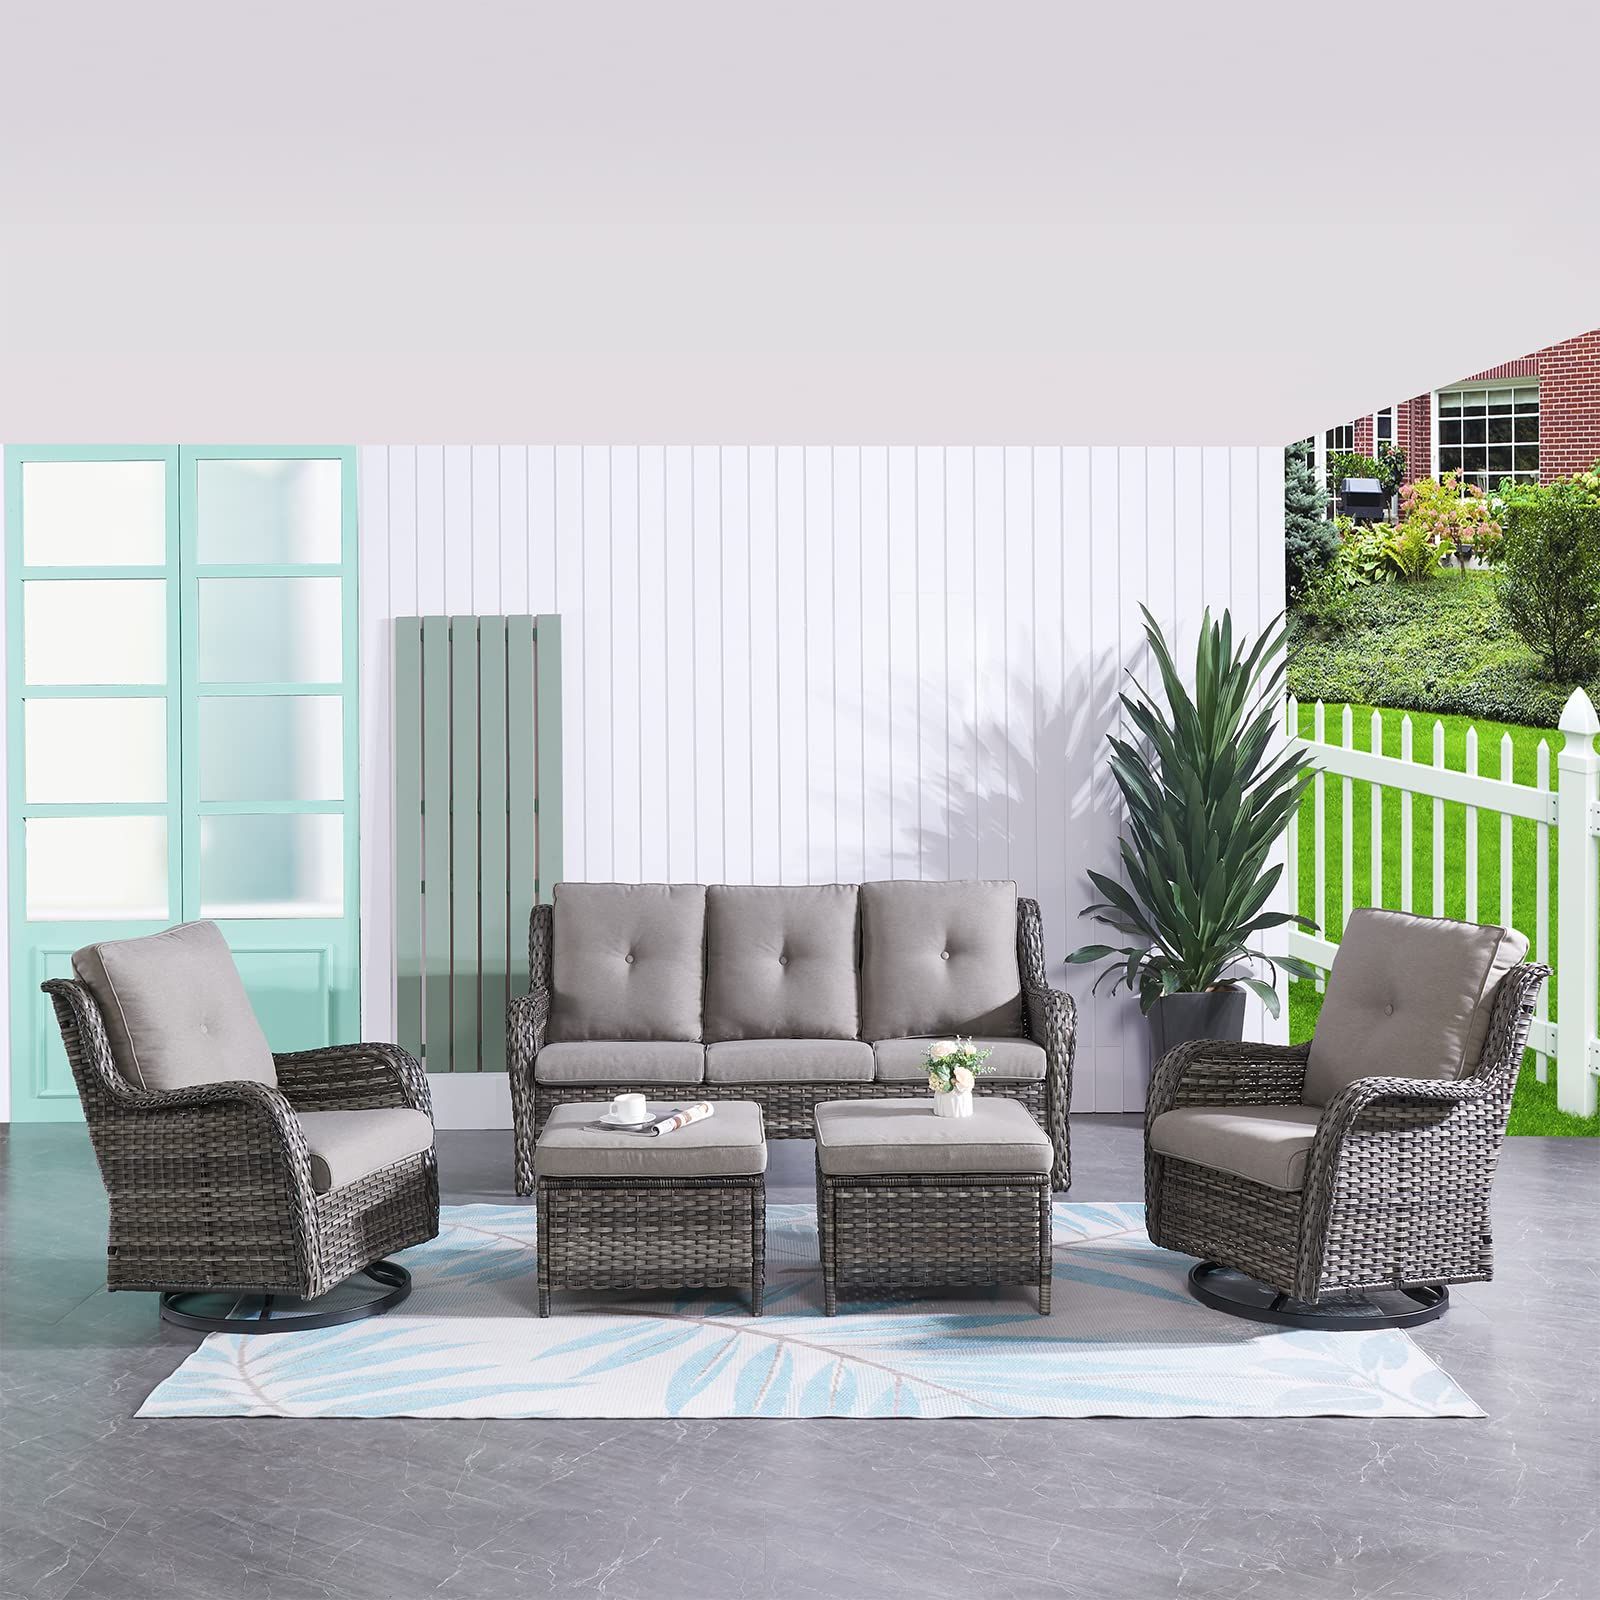 Amazon: Hummuh 5 Pieces Outdoor Furniture Patio Furniture Set Wicker  Outdoor Sectional Sofa With Swivel Rocking Chairs,patio Ottomans : Patio,  Lawn & Garden In Well Liked Rocking Chairs Wicker Patio Furniture Set (Photo 2 of 15)